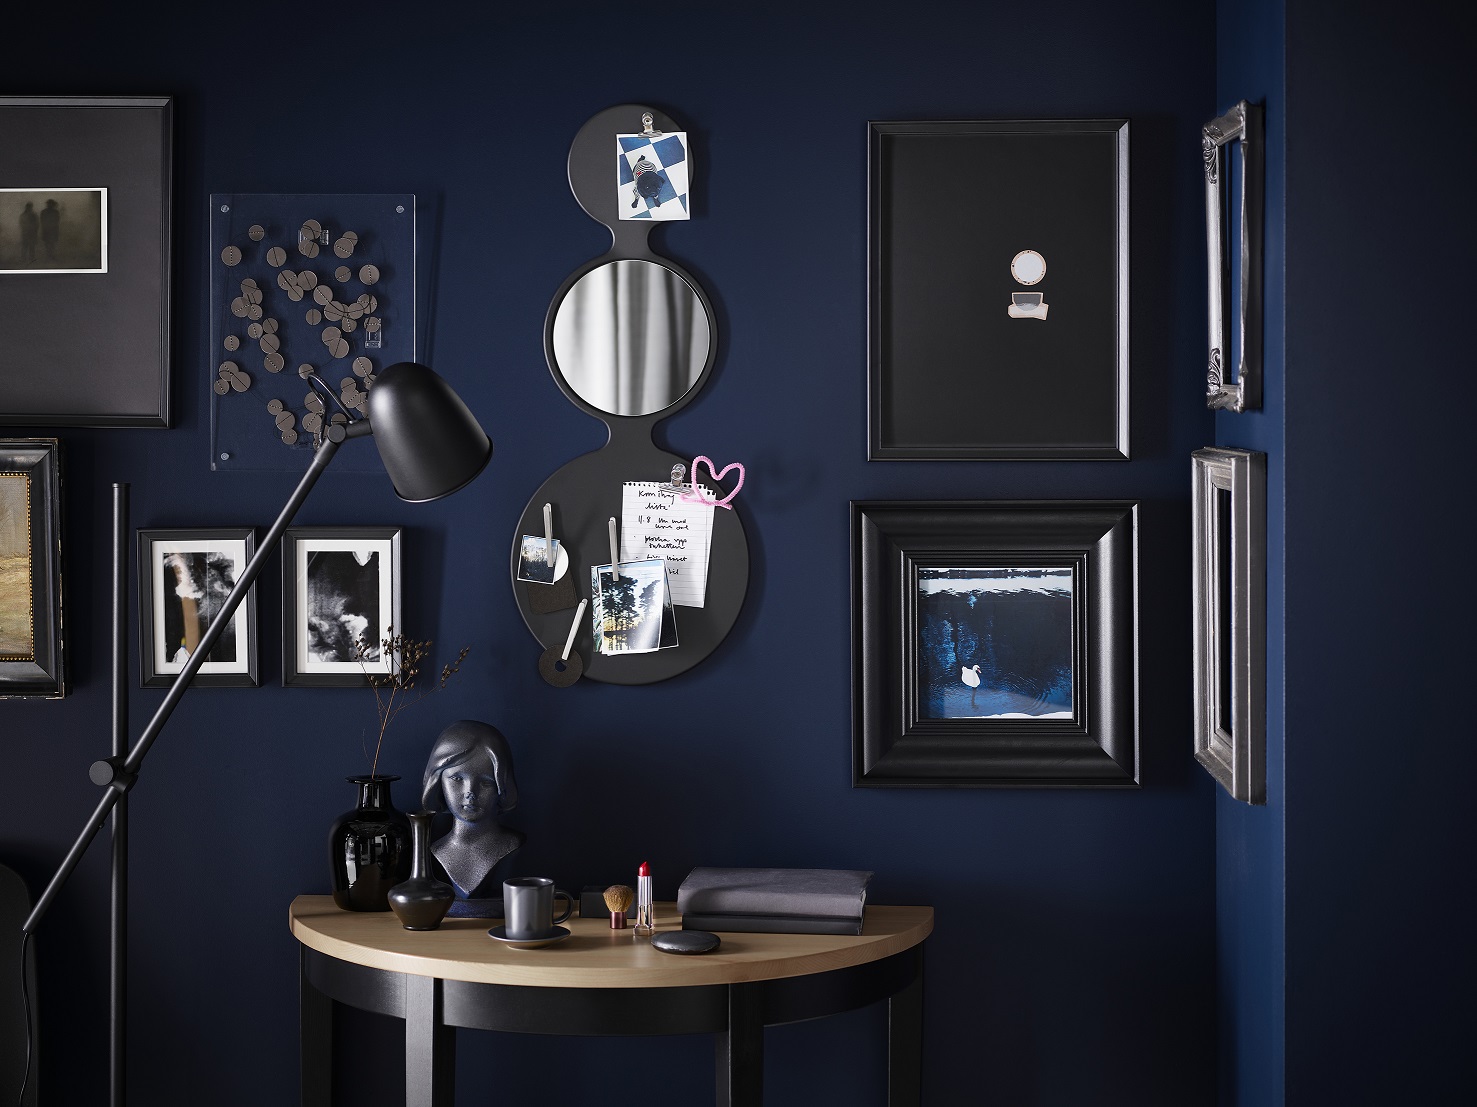 Ikea S Fall Winter Collection With Sustainable Products And Primary Colors The Nordroom